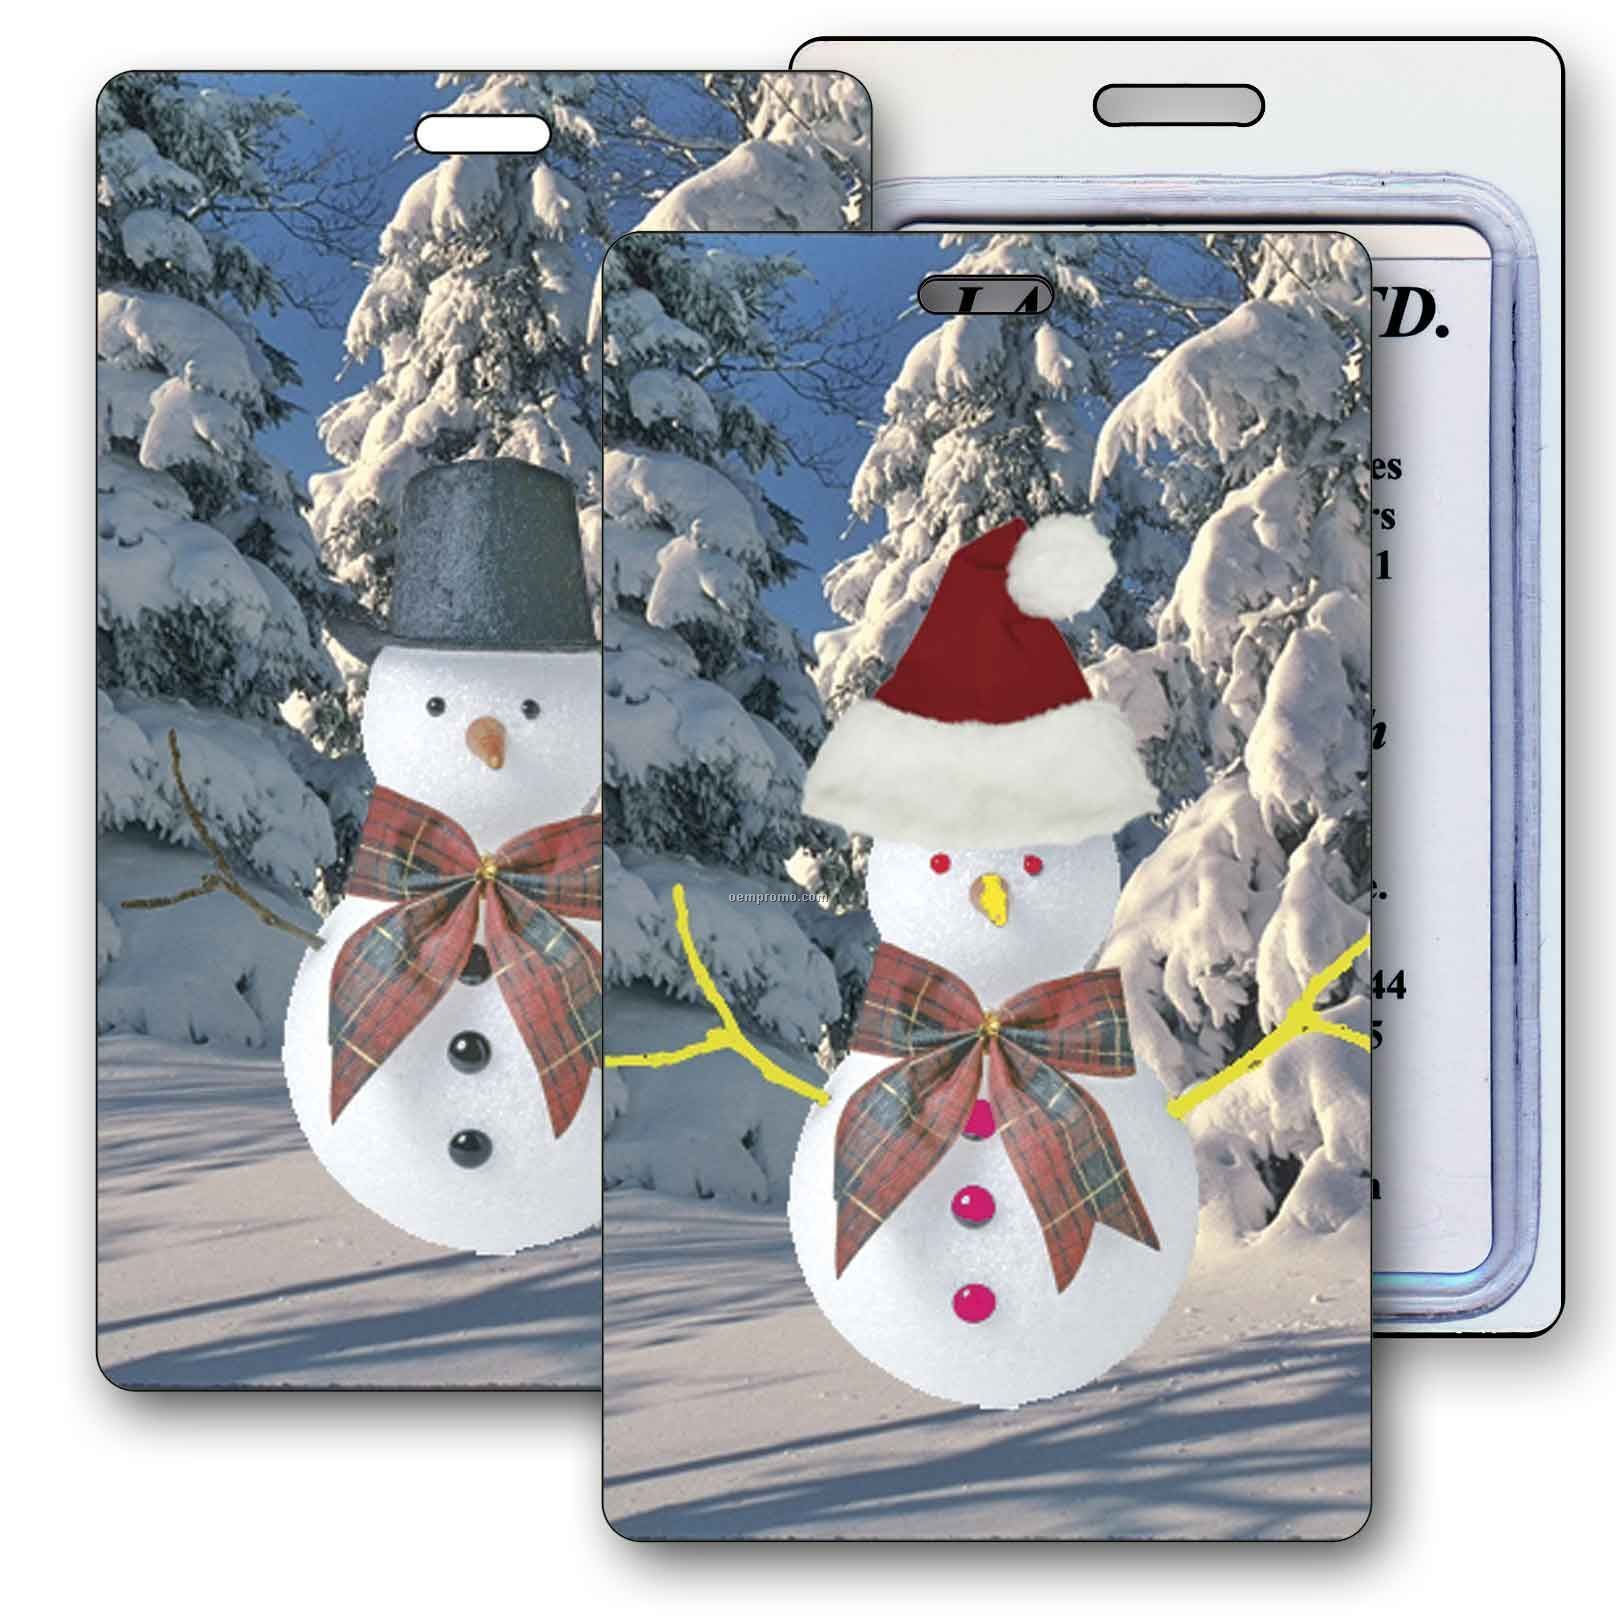 Luggage Tag 3d Lenticular Winter, Snowman,Santa,Stock Image (Blank Product)